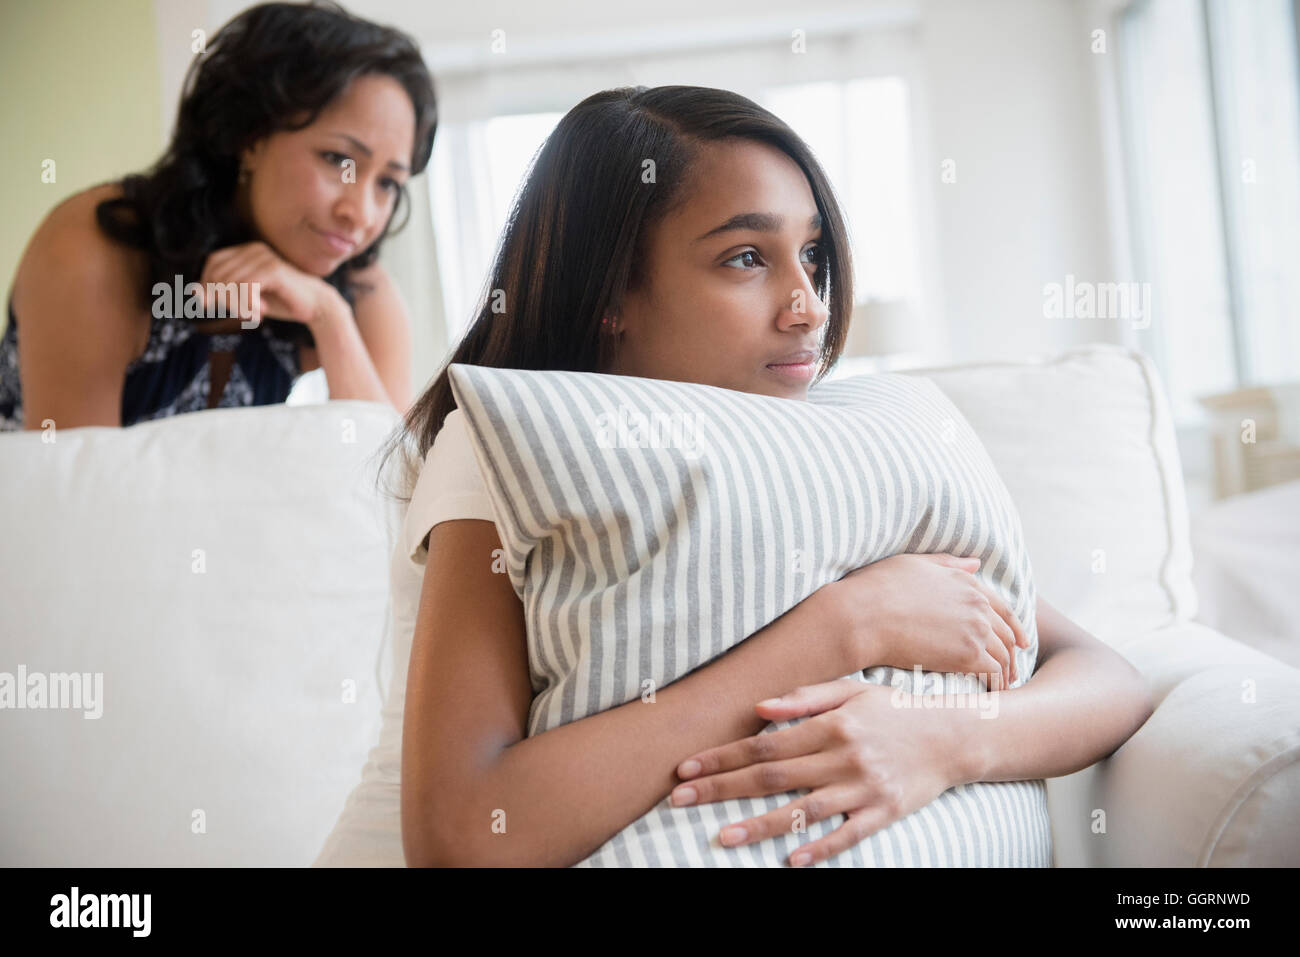 Mother watching pensive daughter clutching pillow Stock Photo